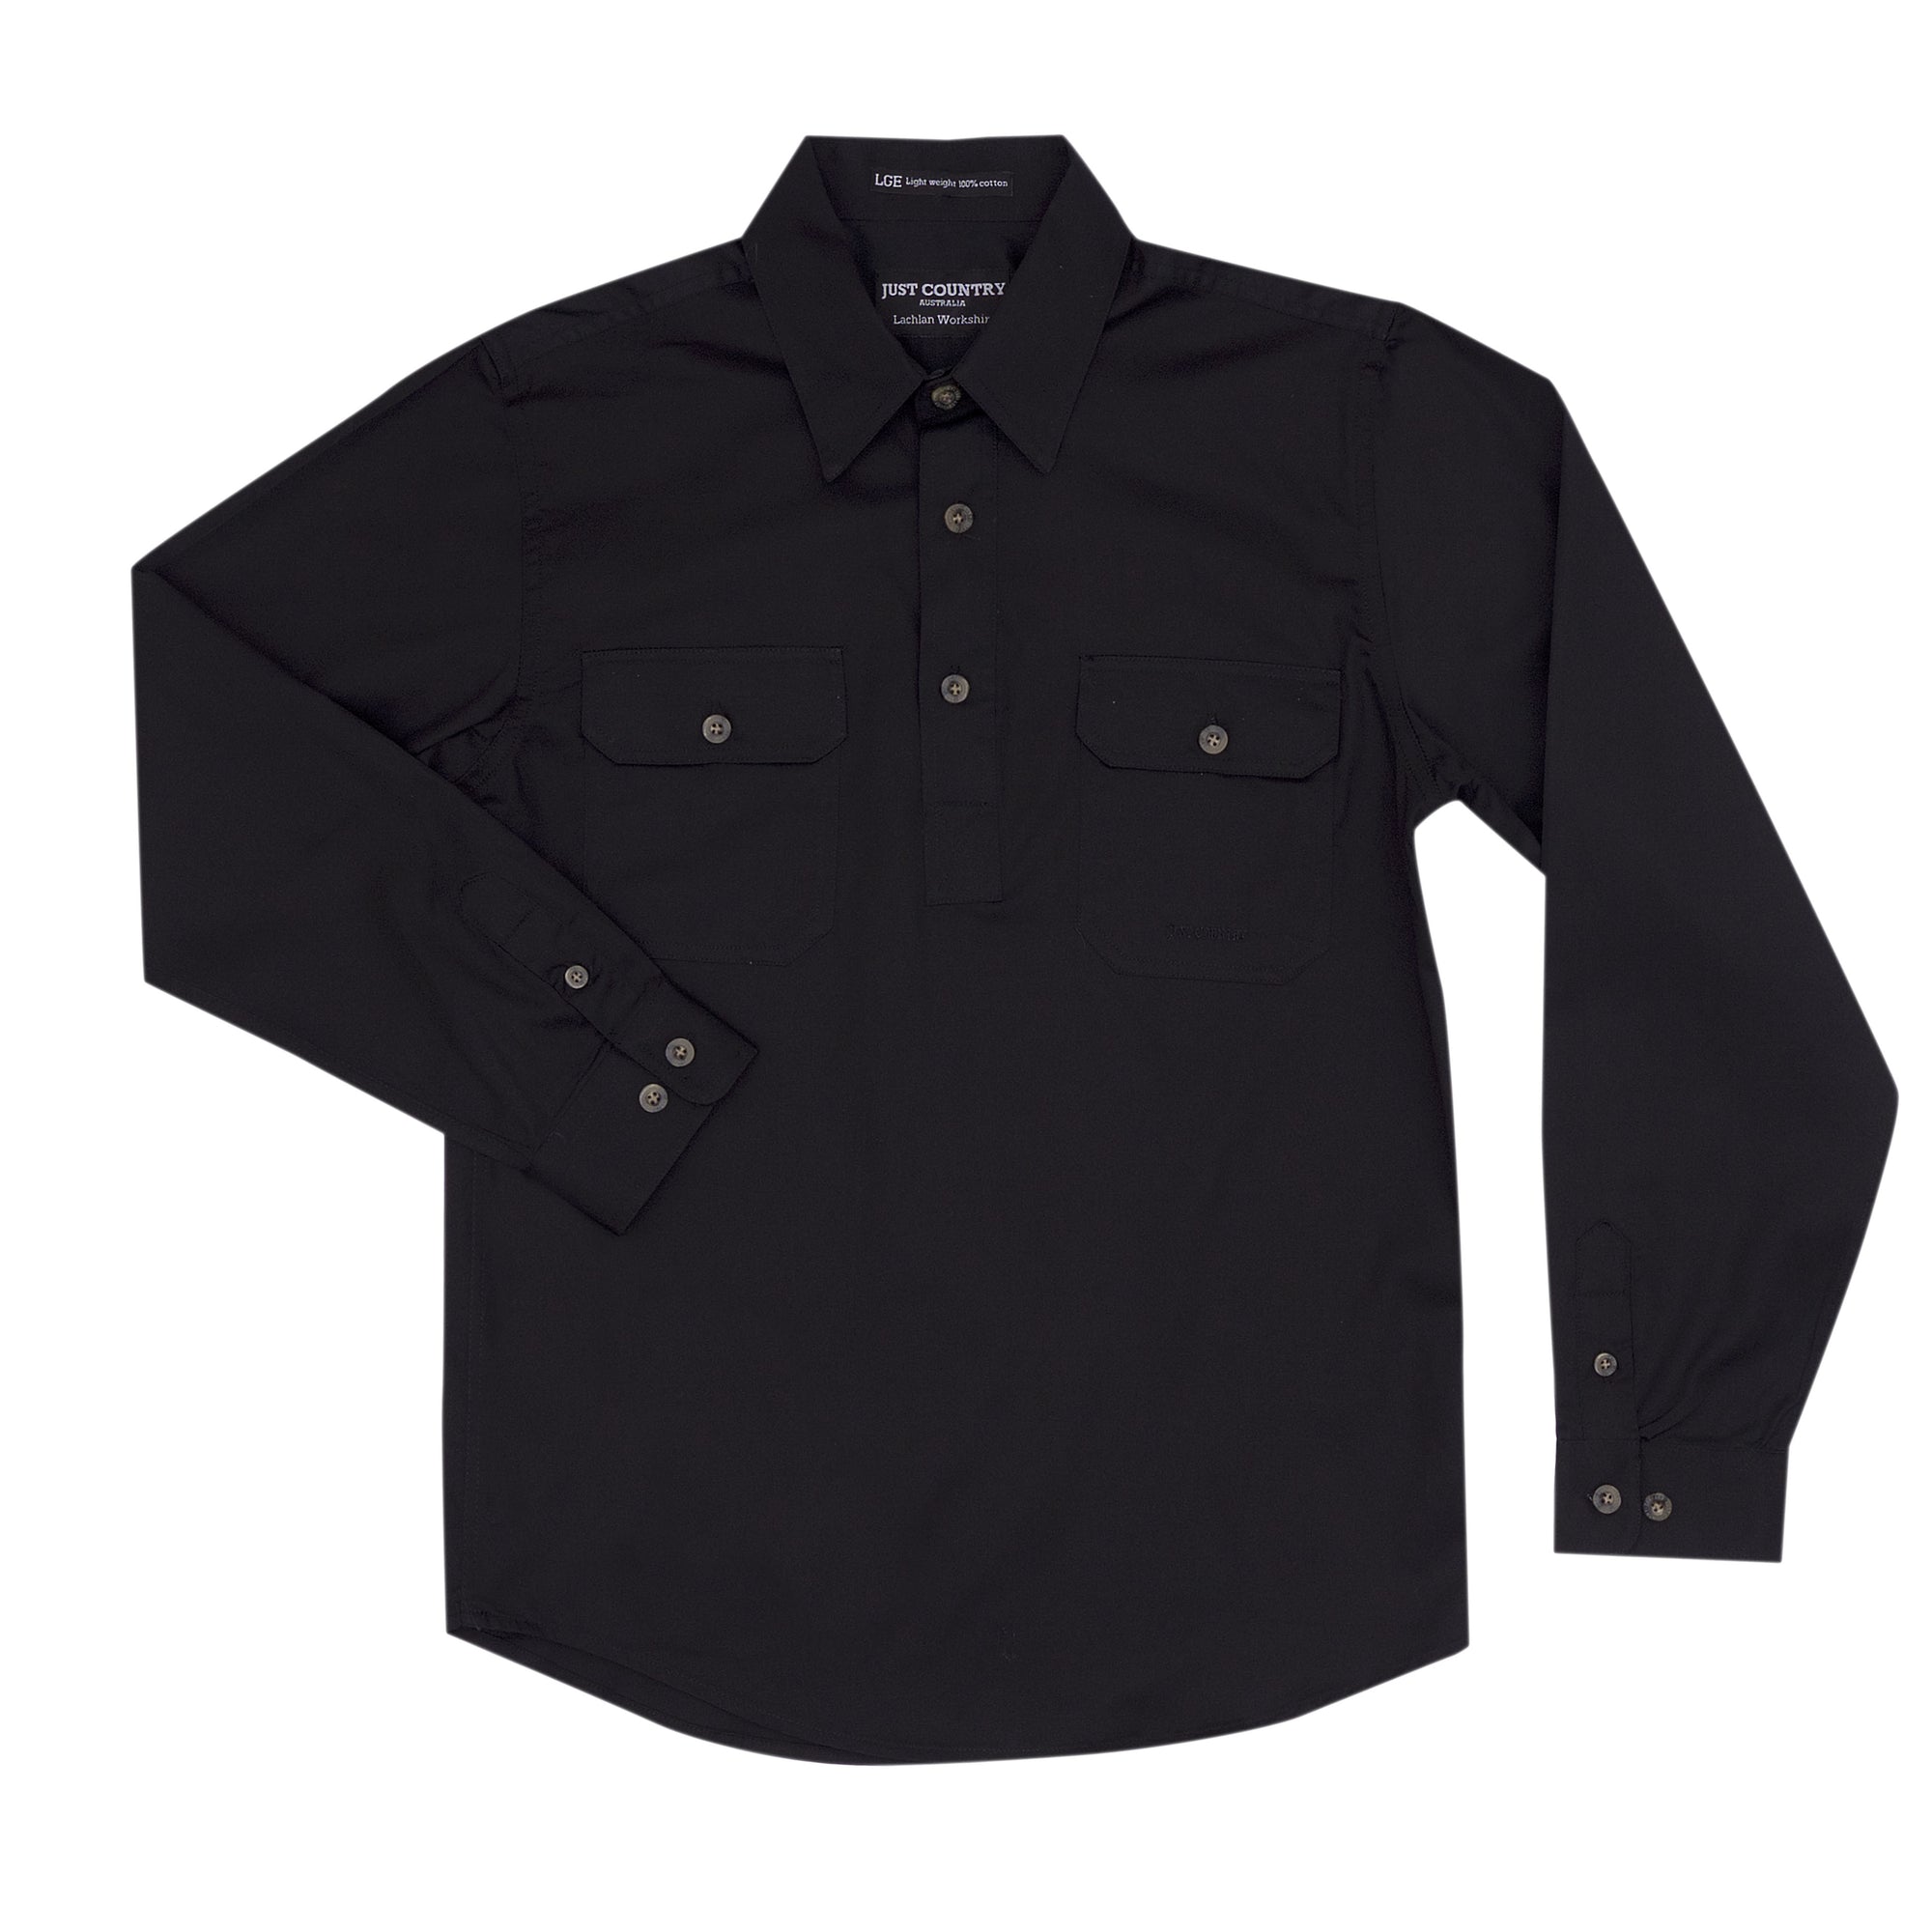 Just Country Workshirt Boys Lachlan Black